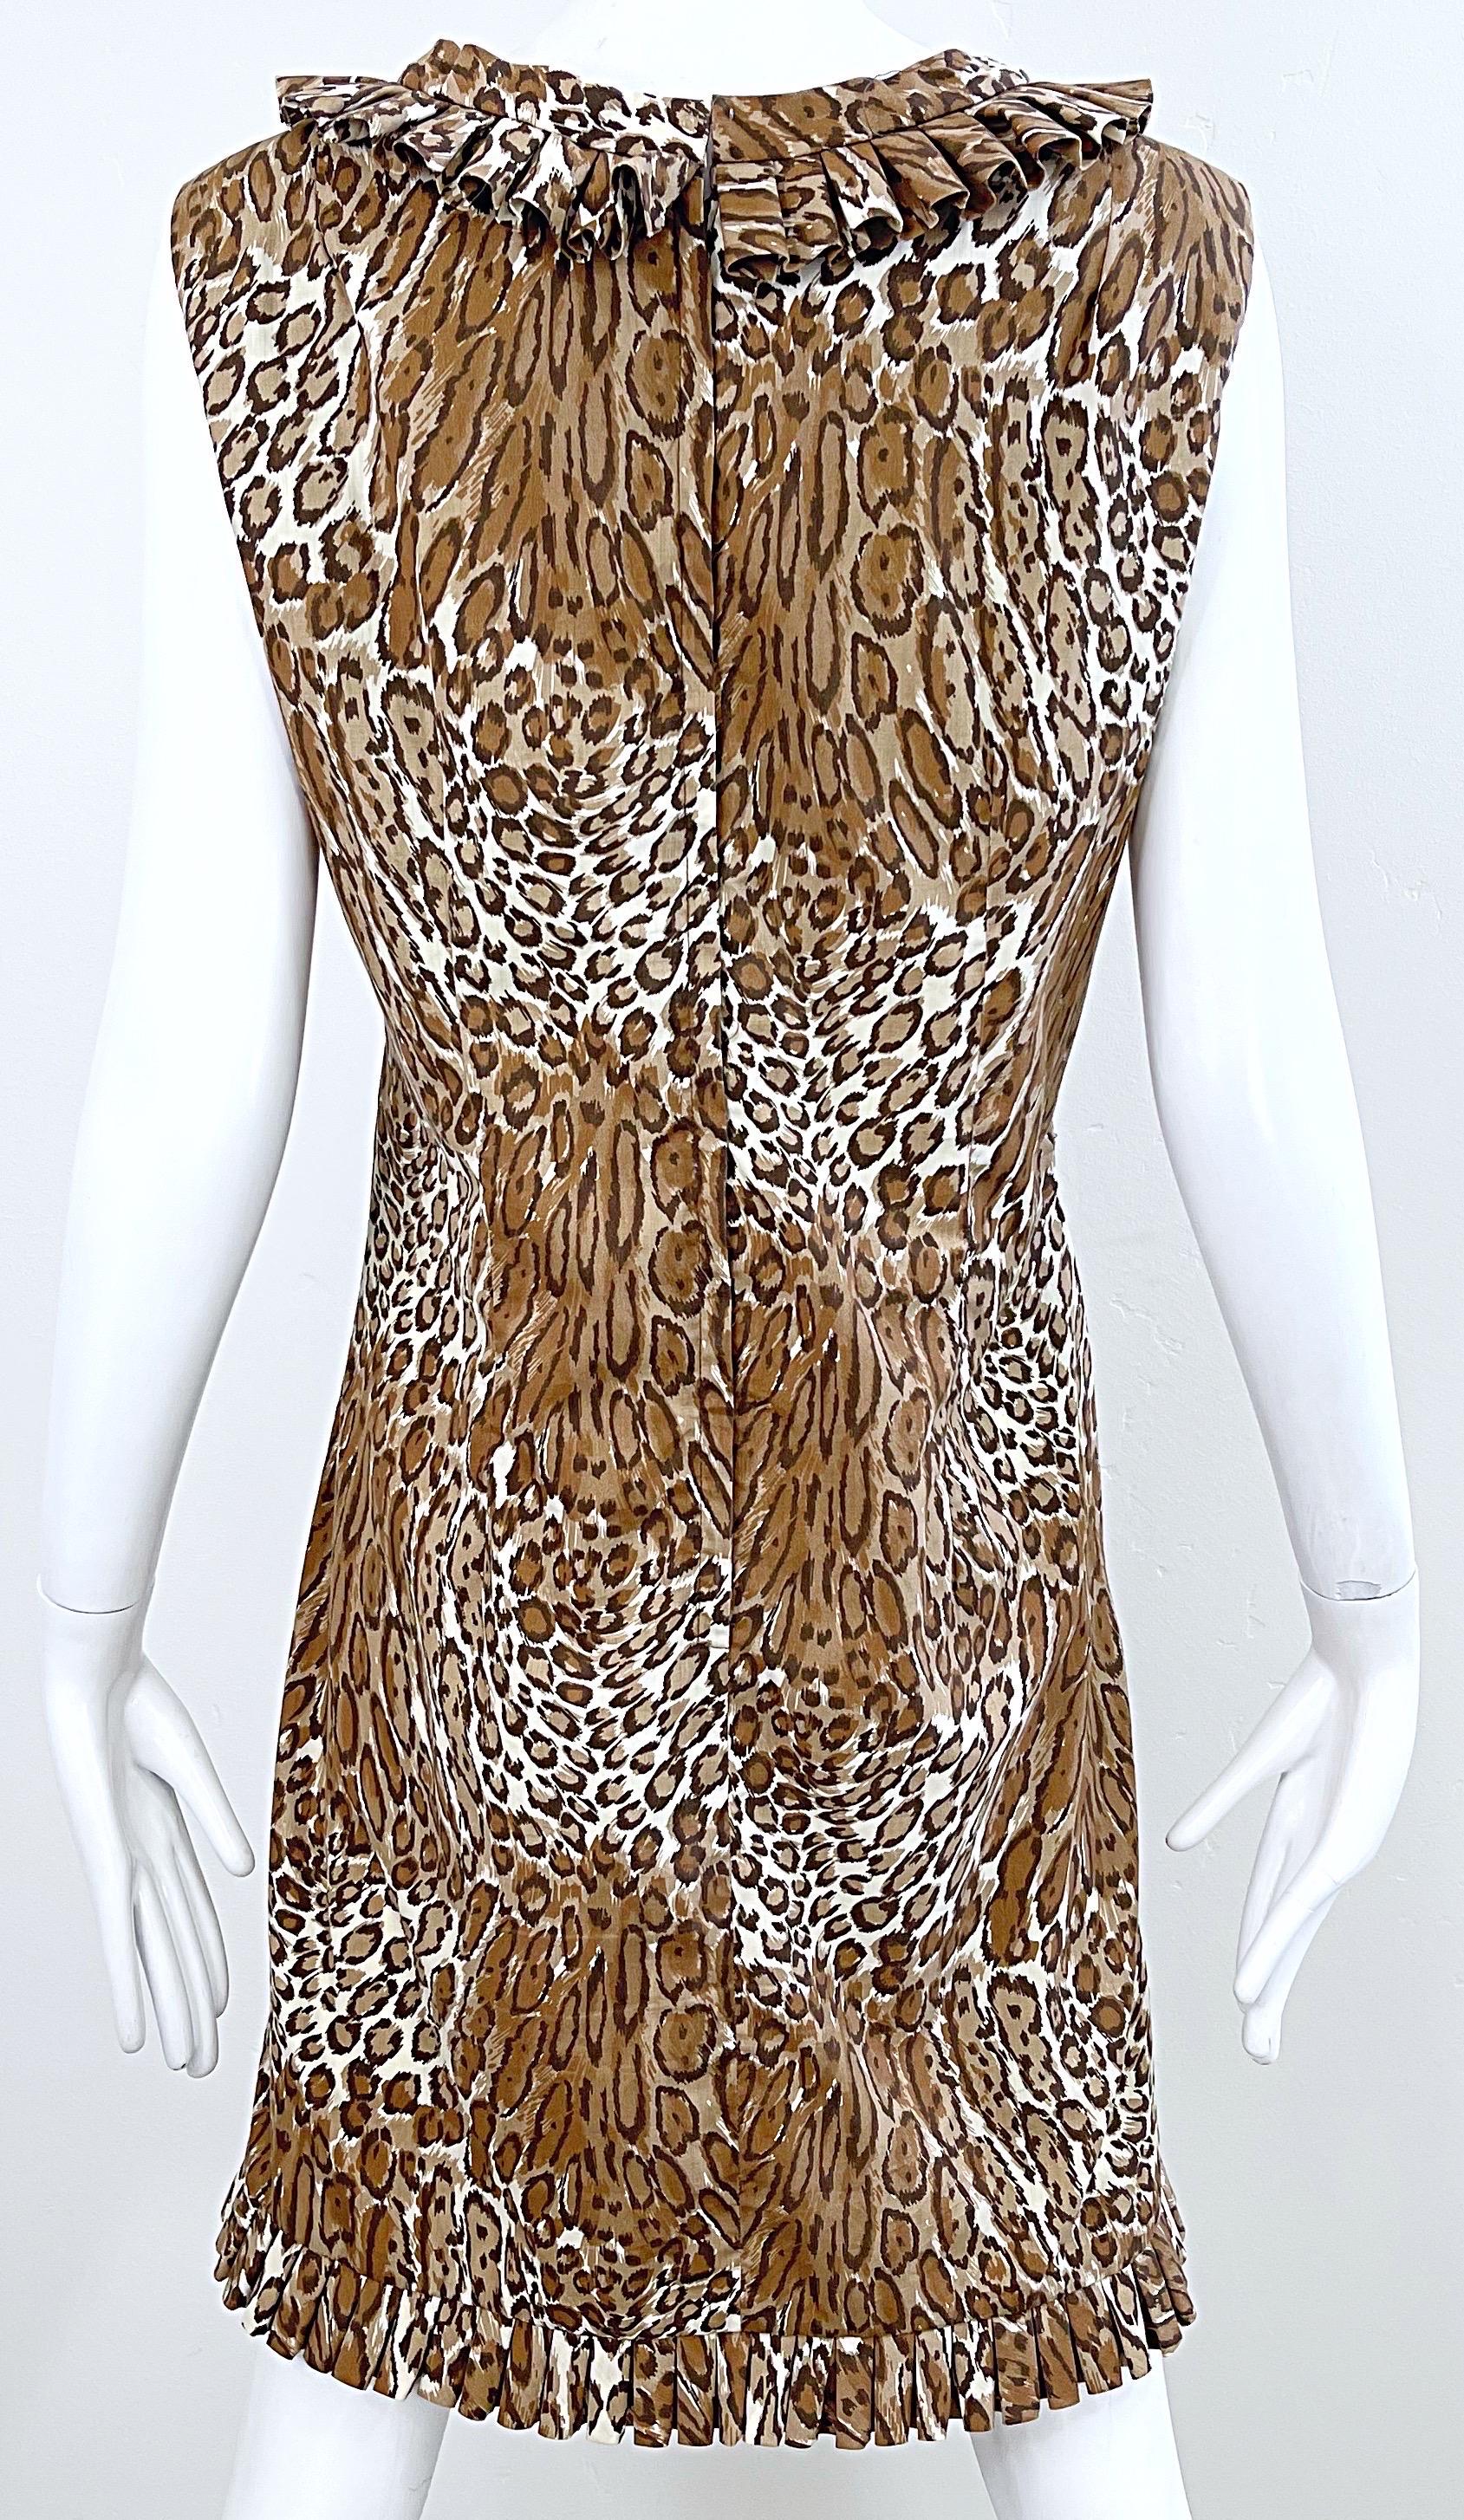 Brown 1960s Chic Leopard Cheetah Animal Abstract Print Cotton Vintage 60s Shift Dress